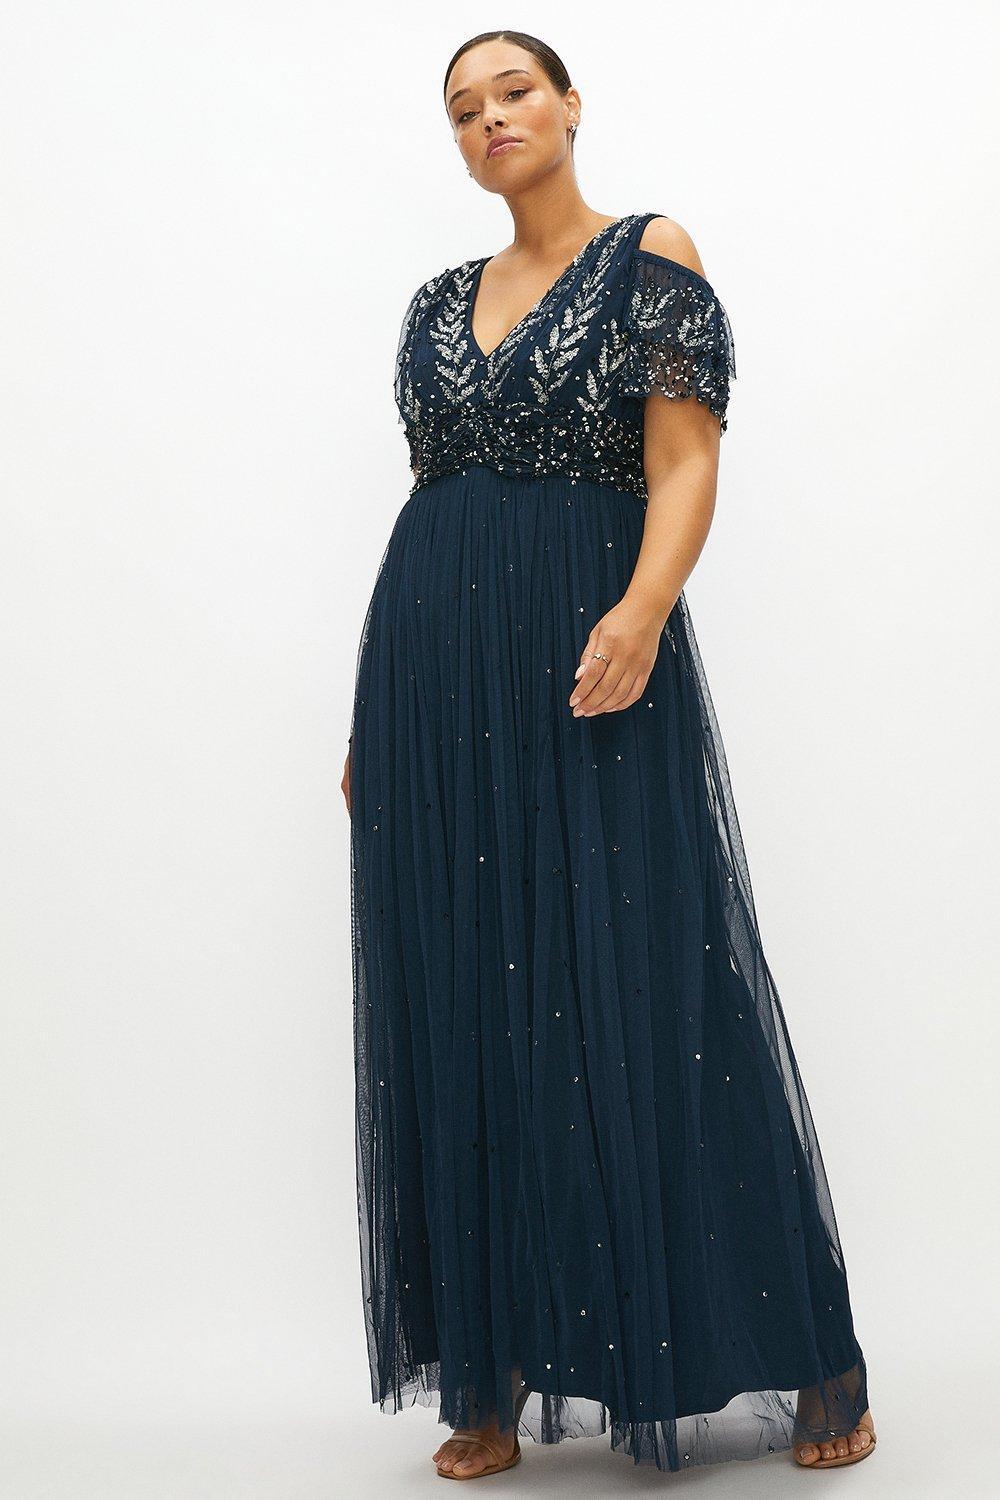 Plus Size Mother of the Bride Dresses ...